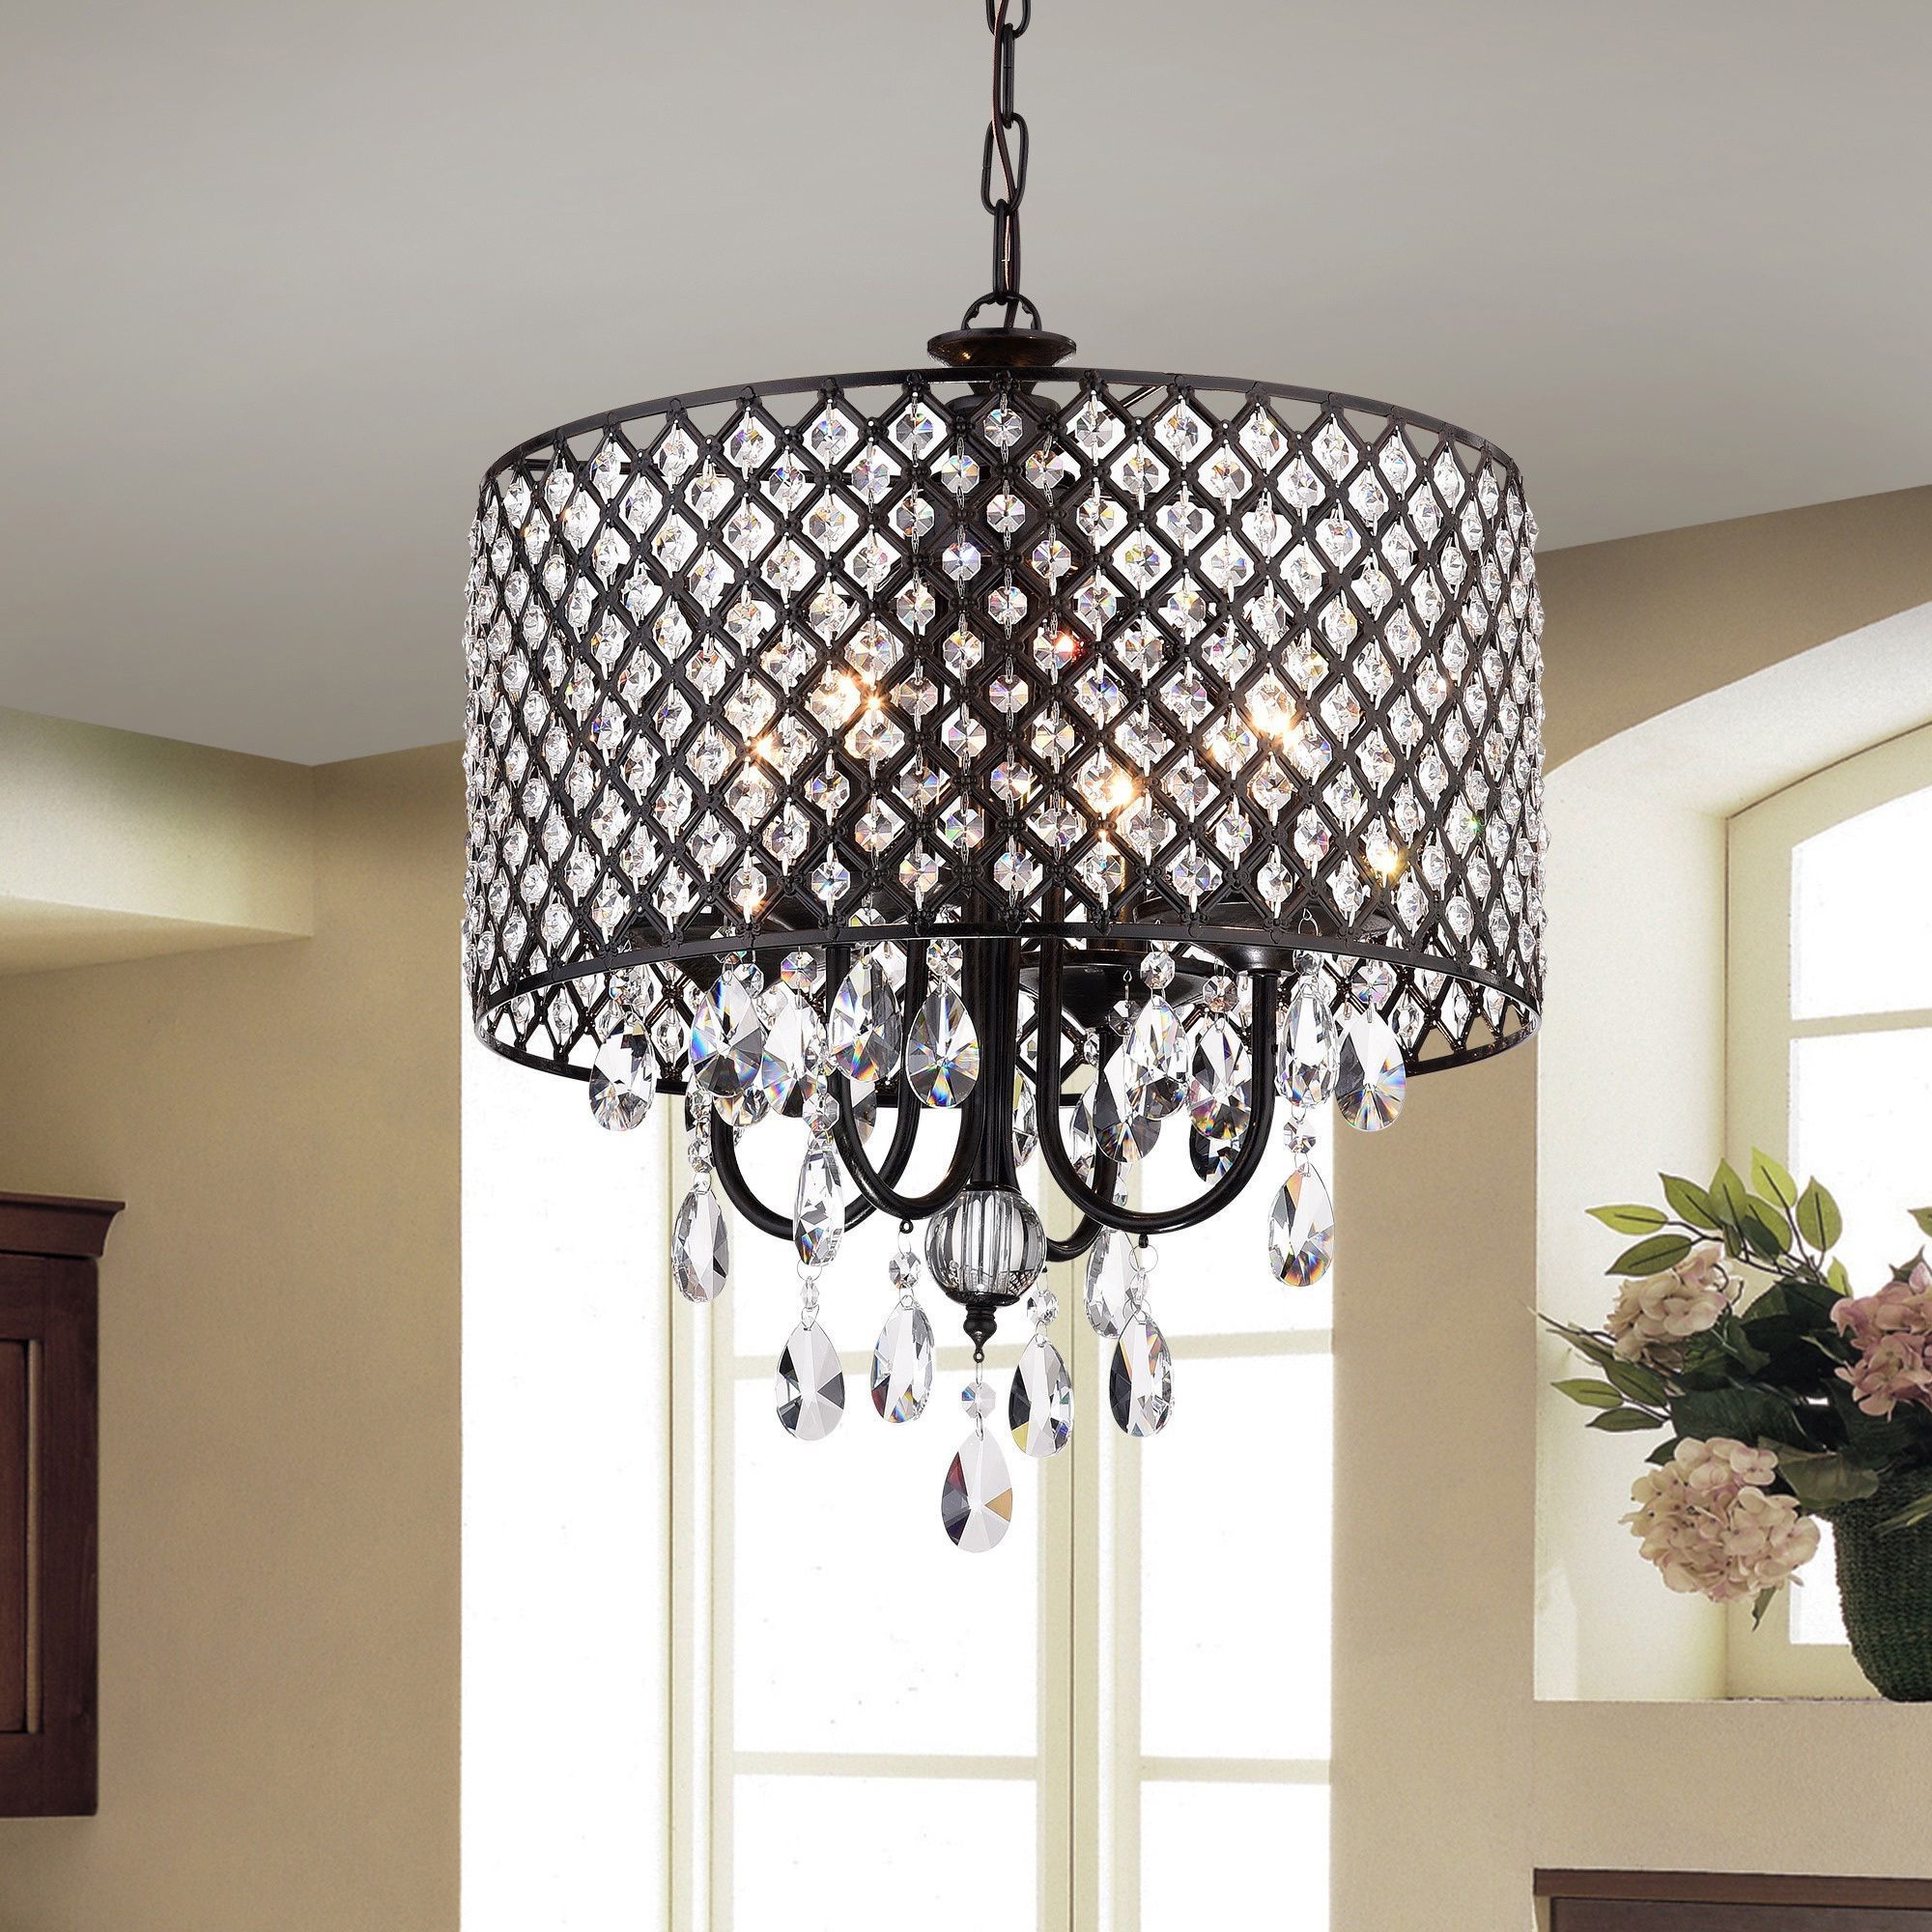 Monet 4 Lights Black Finished 17 Inch Crystal Round Inside Widely Used Albano 4 Light Crystal Chandeliers (View 12 of 20)